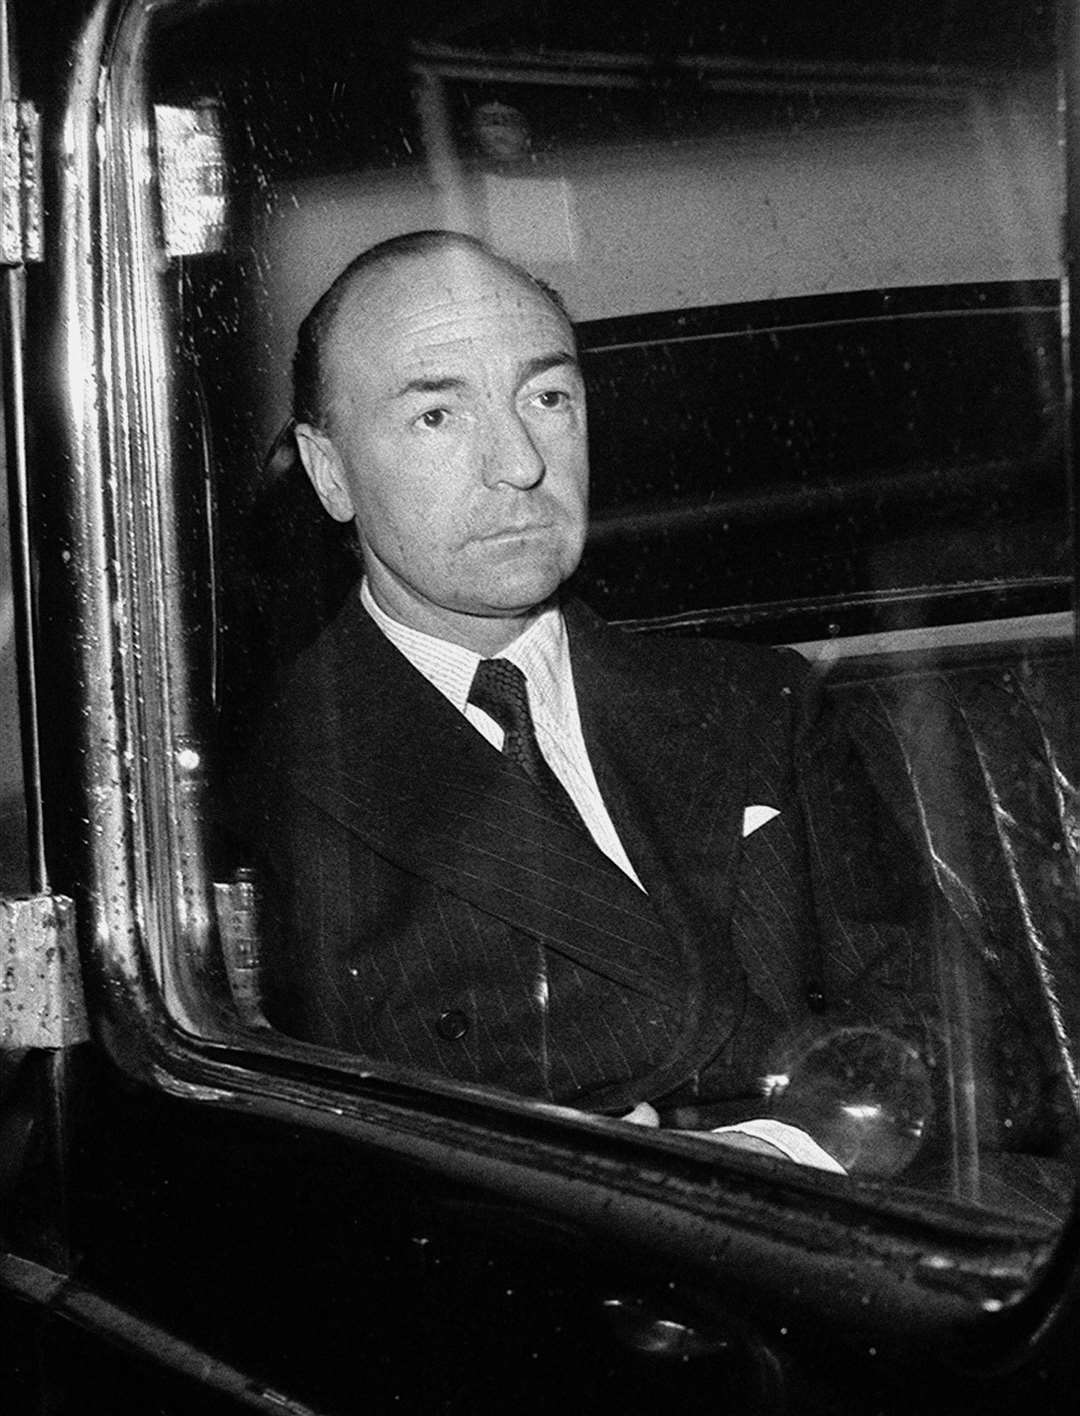 Mr Profumo, who was 48 and married at the time of his affair with Ms Keeler, was given a CBE in 1975 for services to charity after the end of his political career (PA)